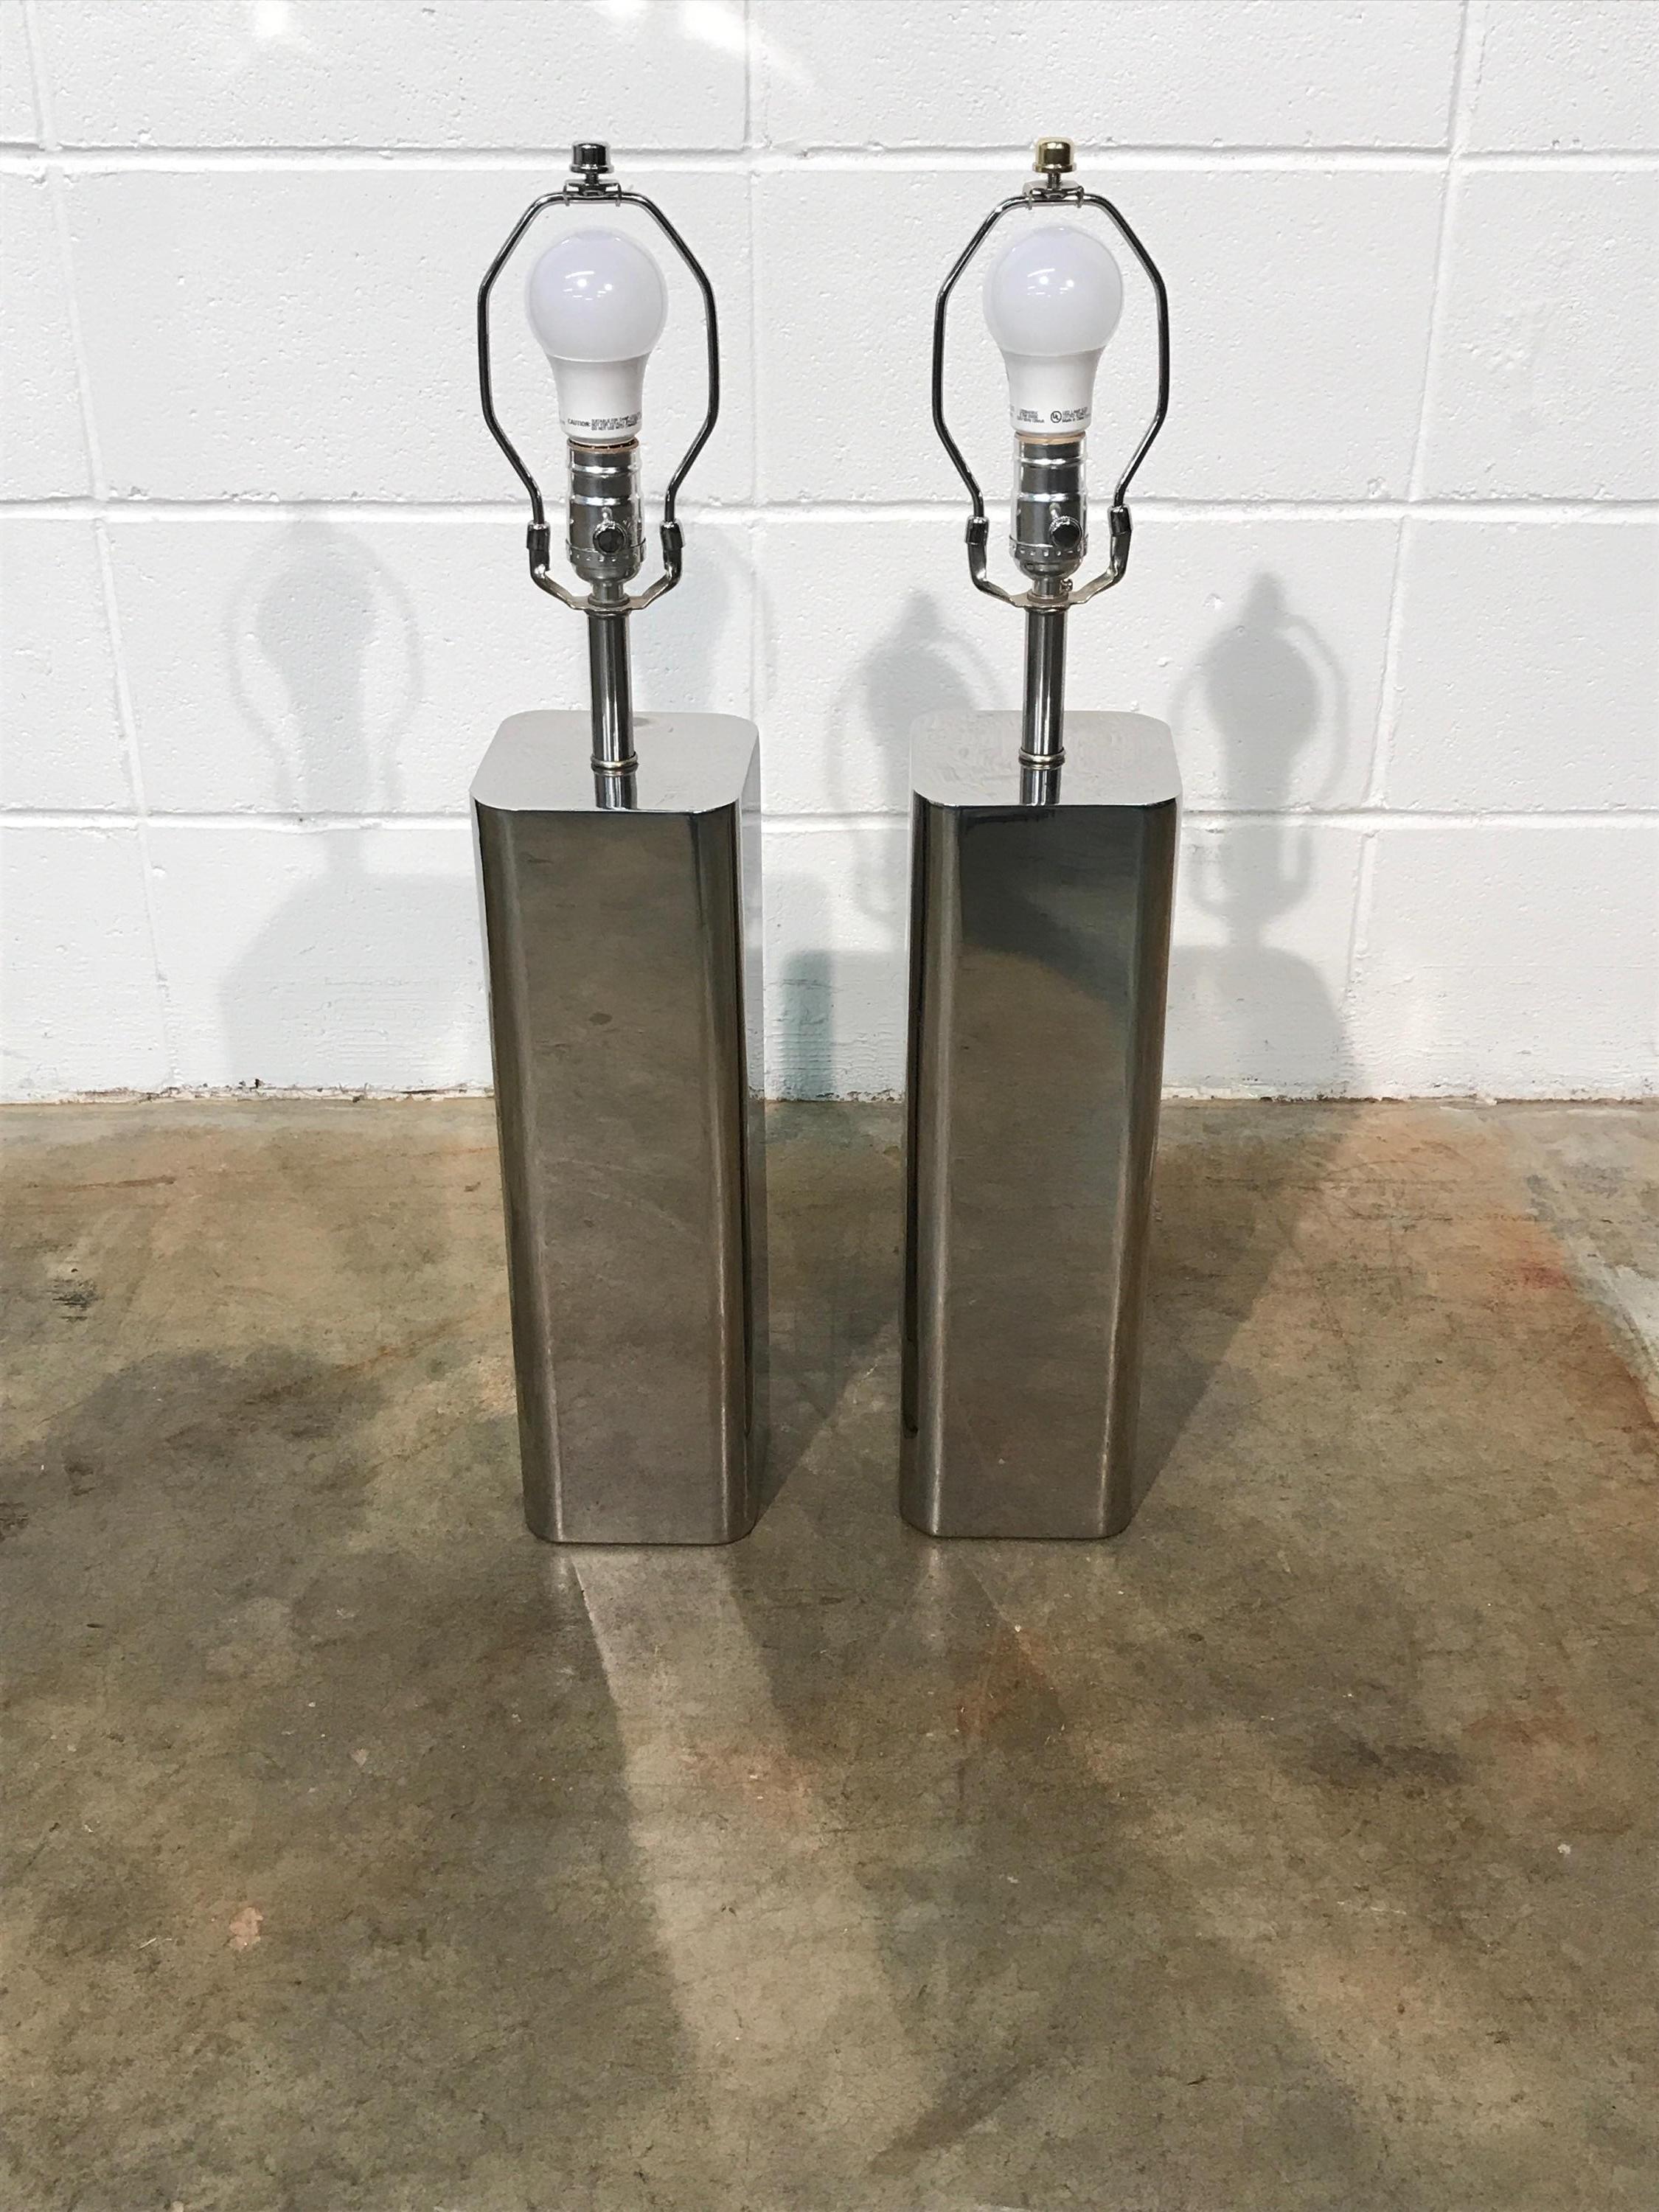 Pair of vintage chrome lamps attributed to Laurel Lamp Co.
These lamps have been fully restored including new wiring, new sockets, new shades, and polished to a mirror shine. No known defects that would detract from value or aesthetics. Ready for